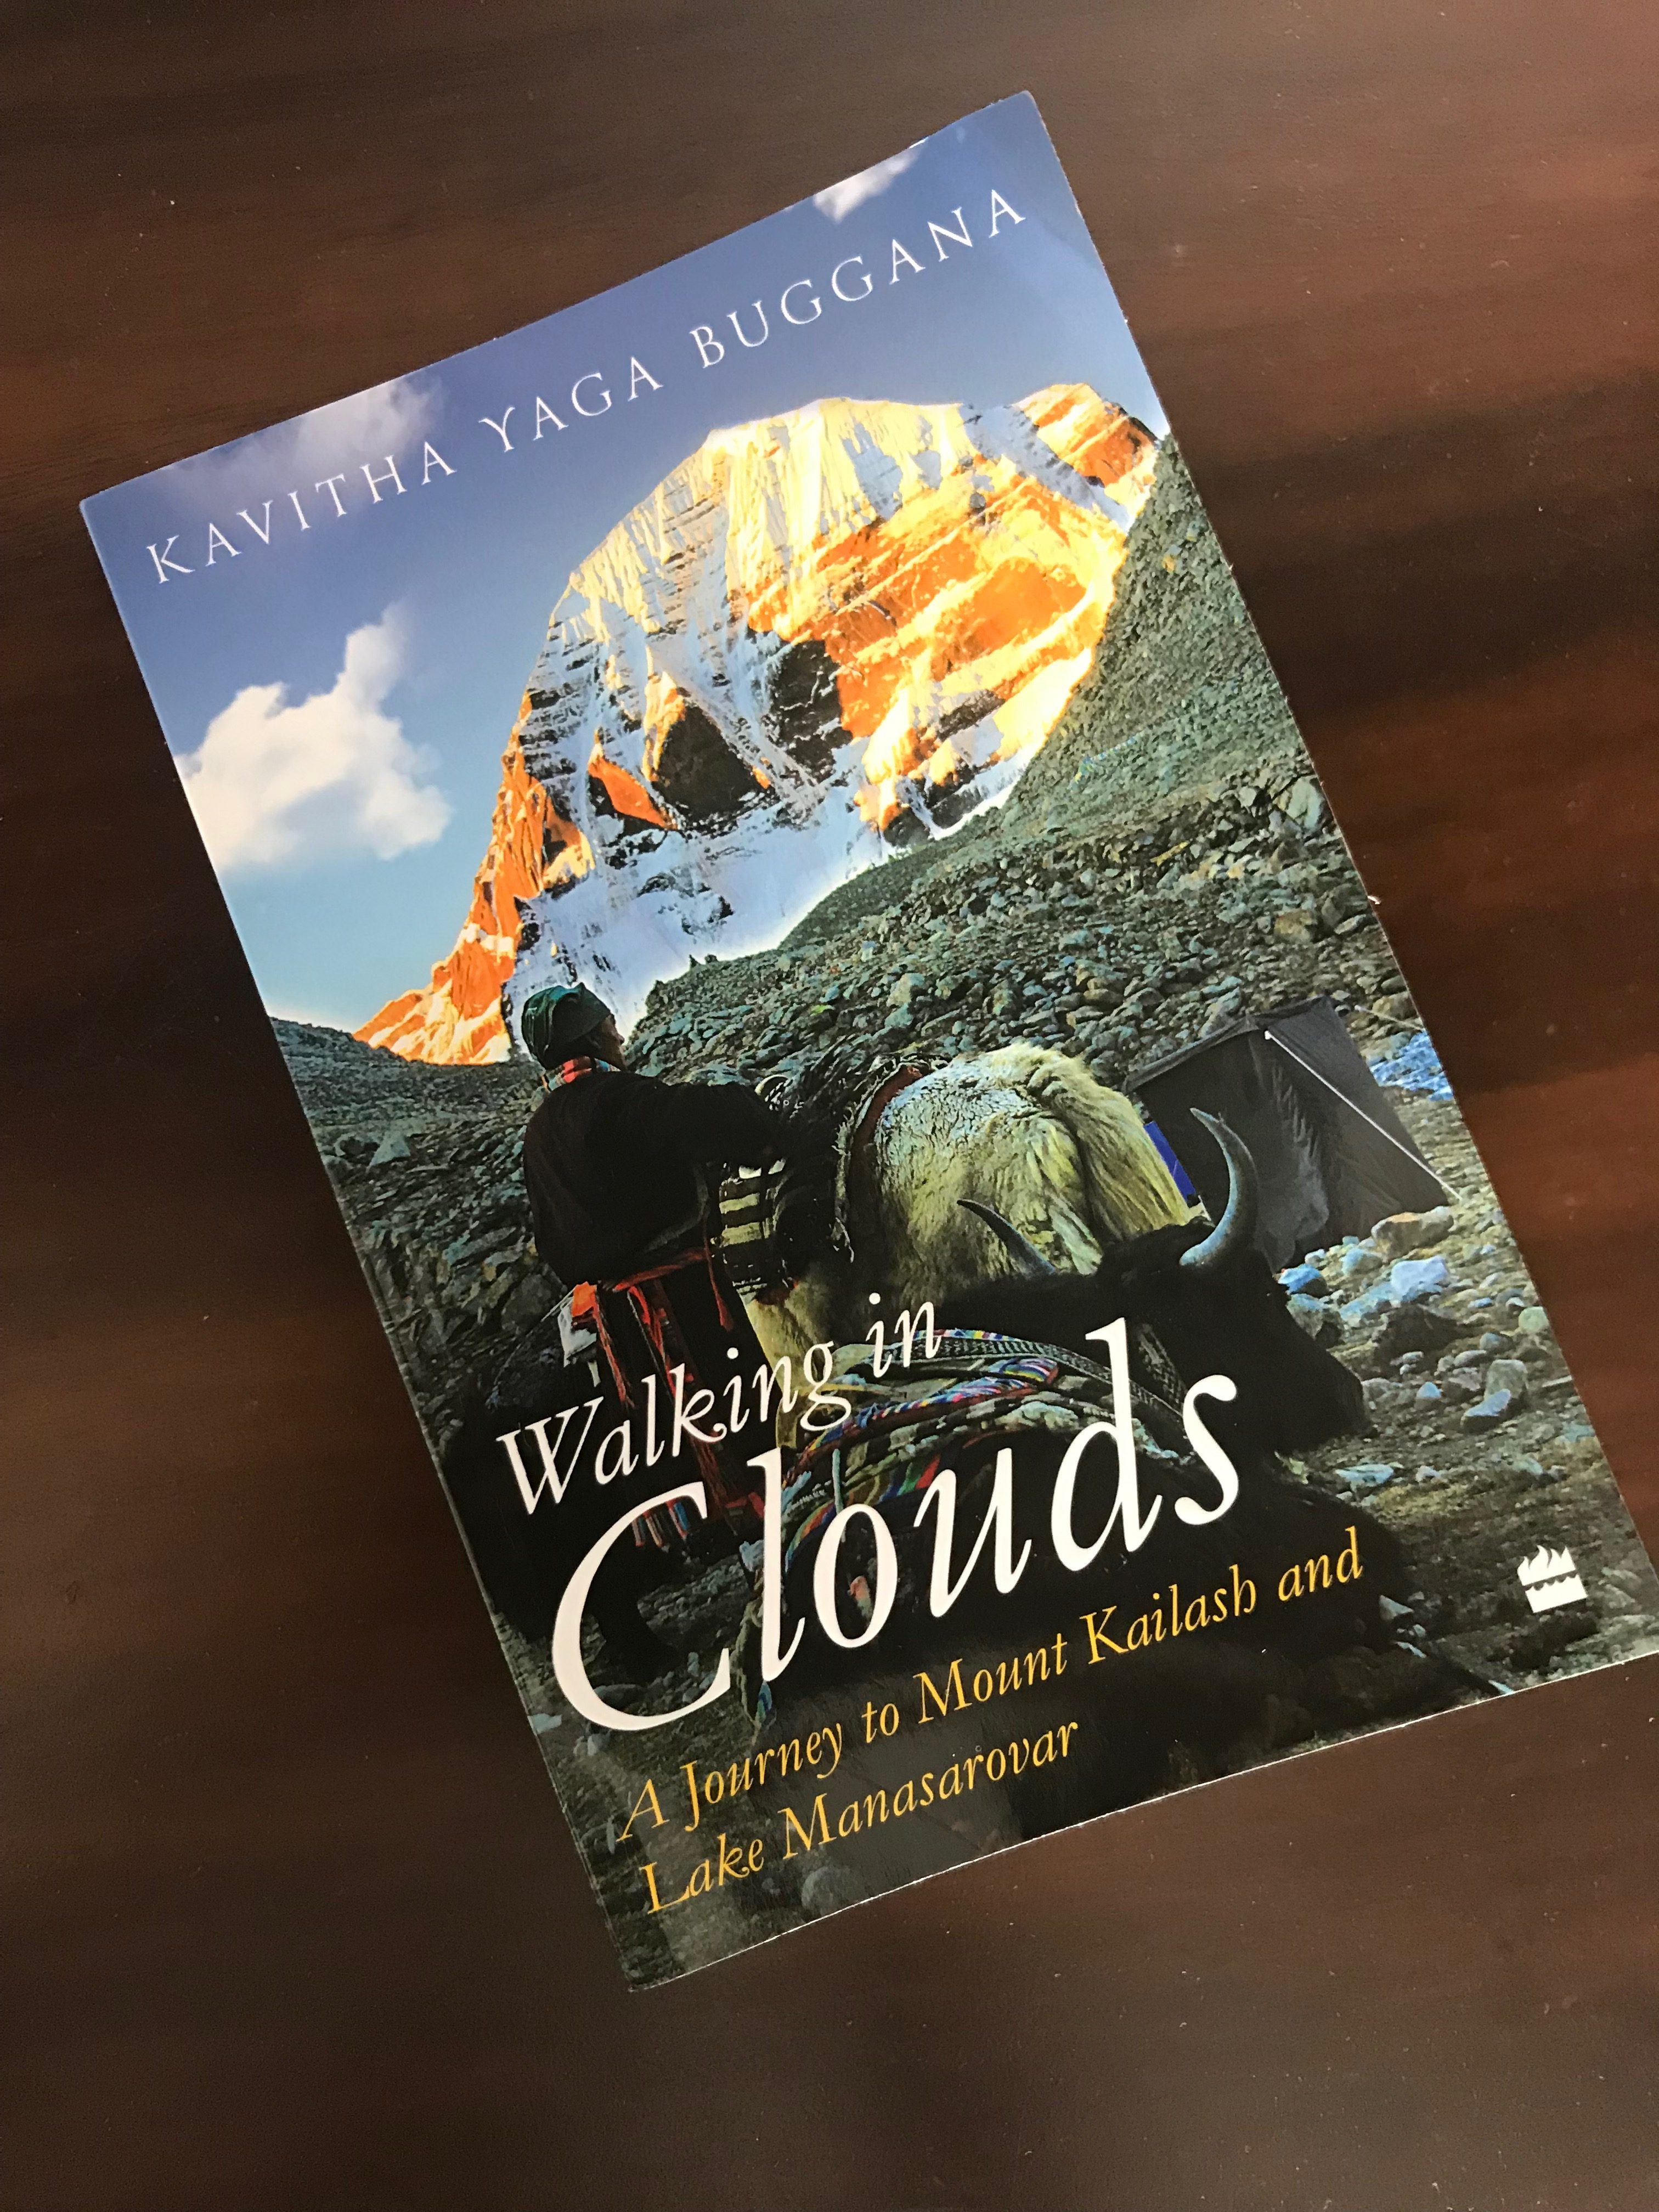 Read more about the article Walking in Clouds – A journey to Mount Kailash and Lake Manasarovar by Kavitha Yaga Buggana